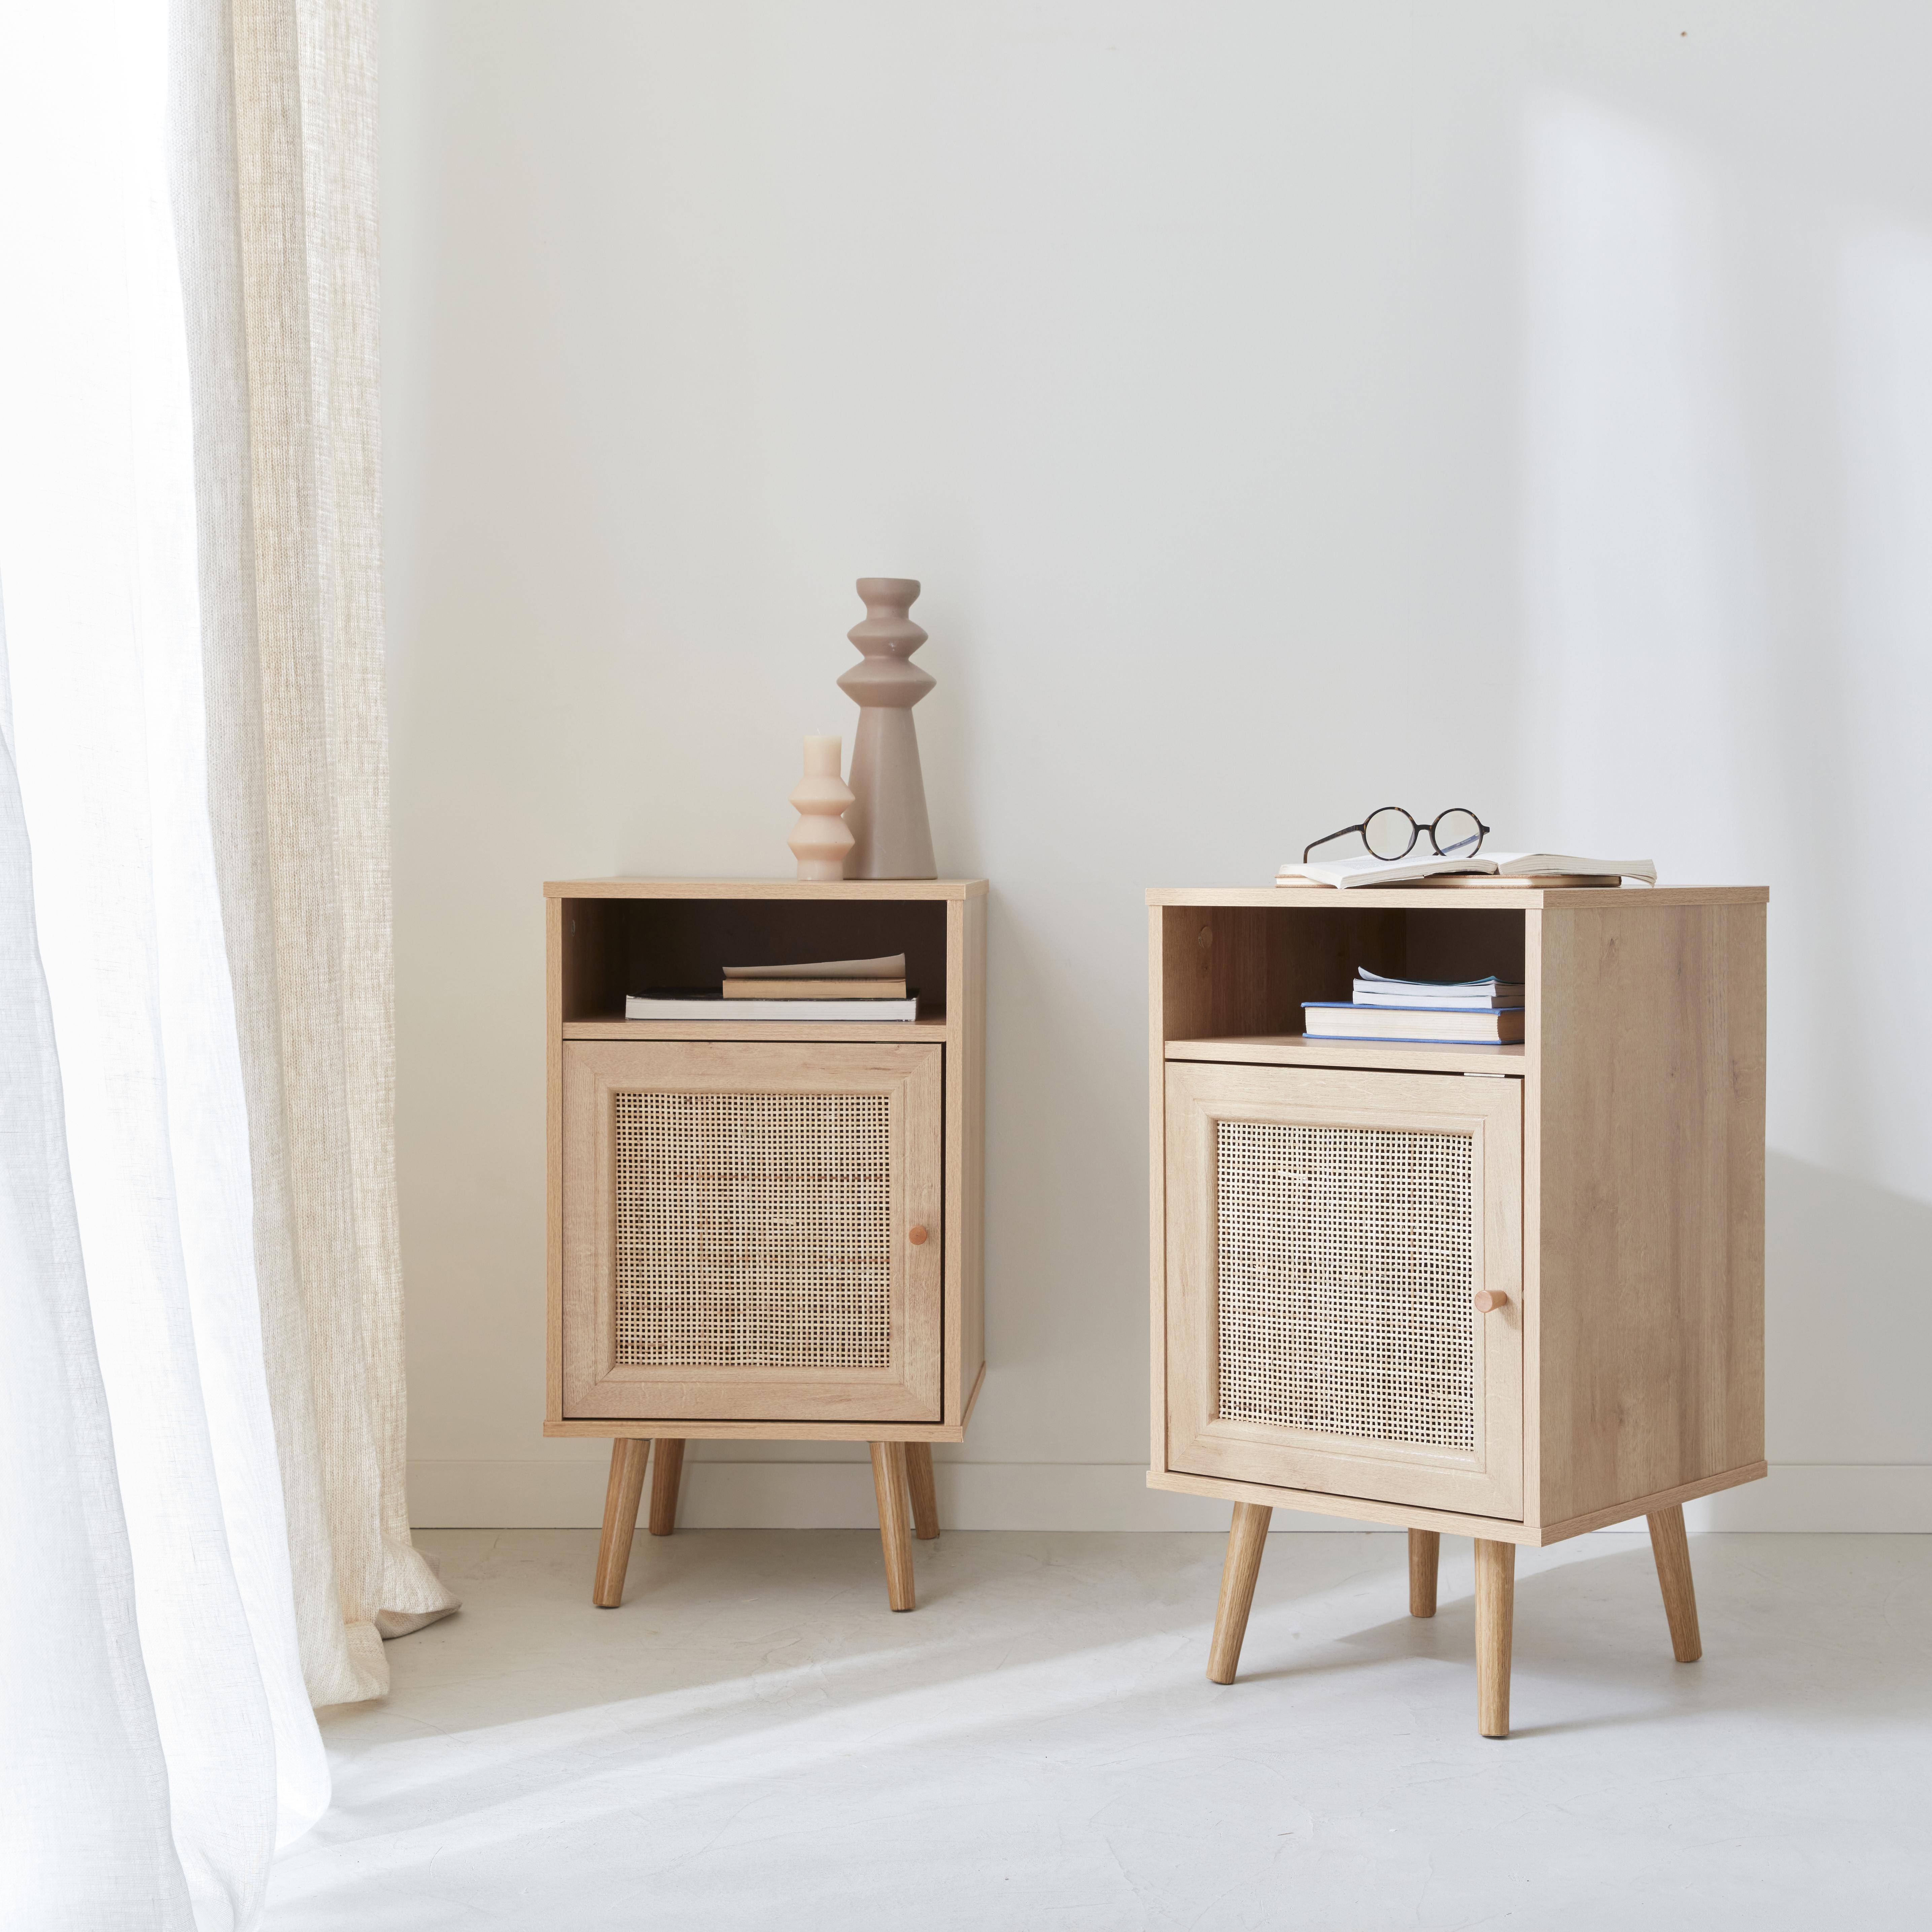 Pair of Scandi-style wood and cane rattan bedside tables with cupboard, 40x39x70cm - Boheme - Natural Wood colour,sweeek,Photo2